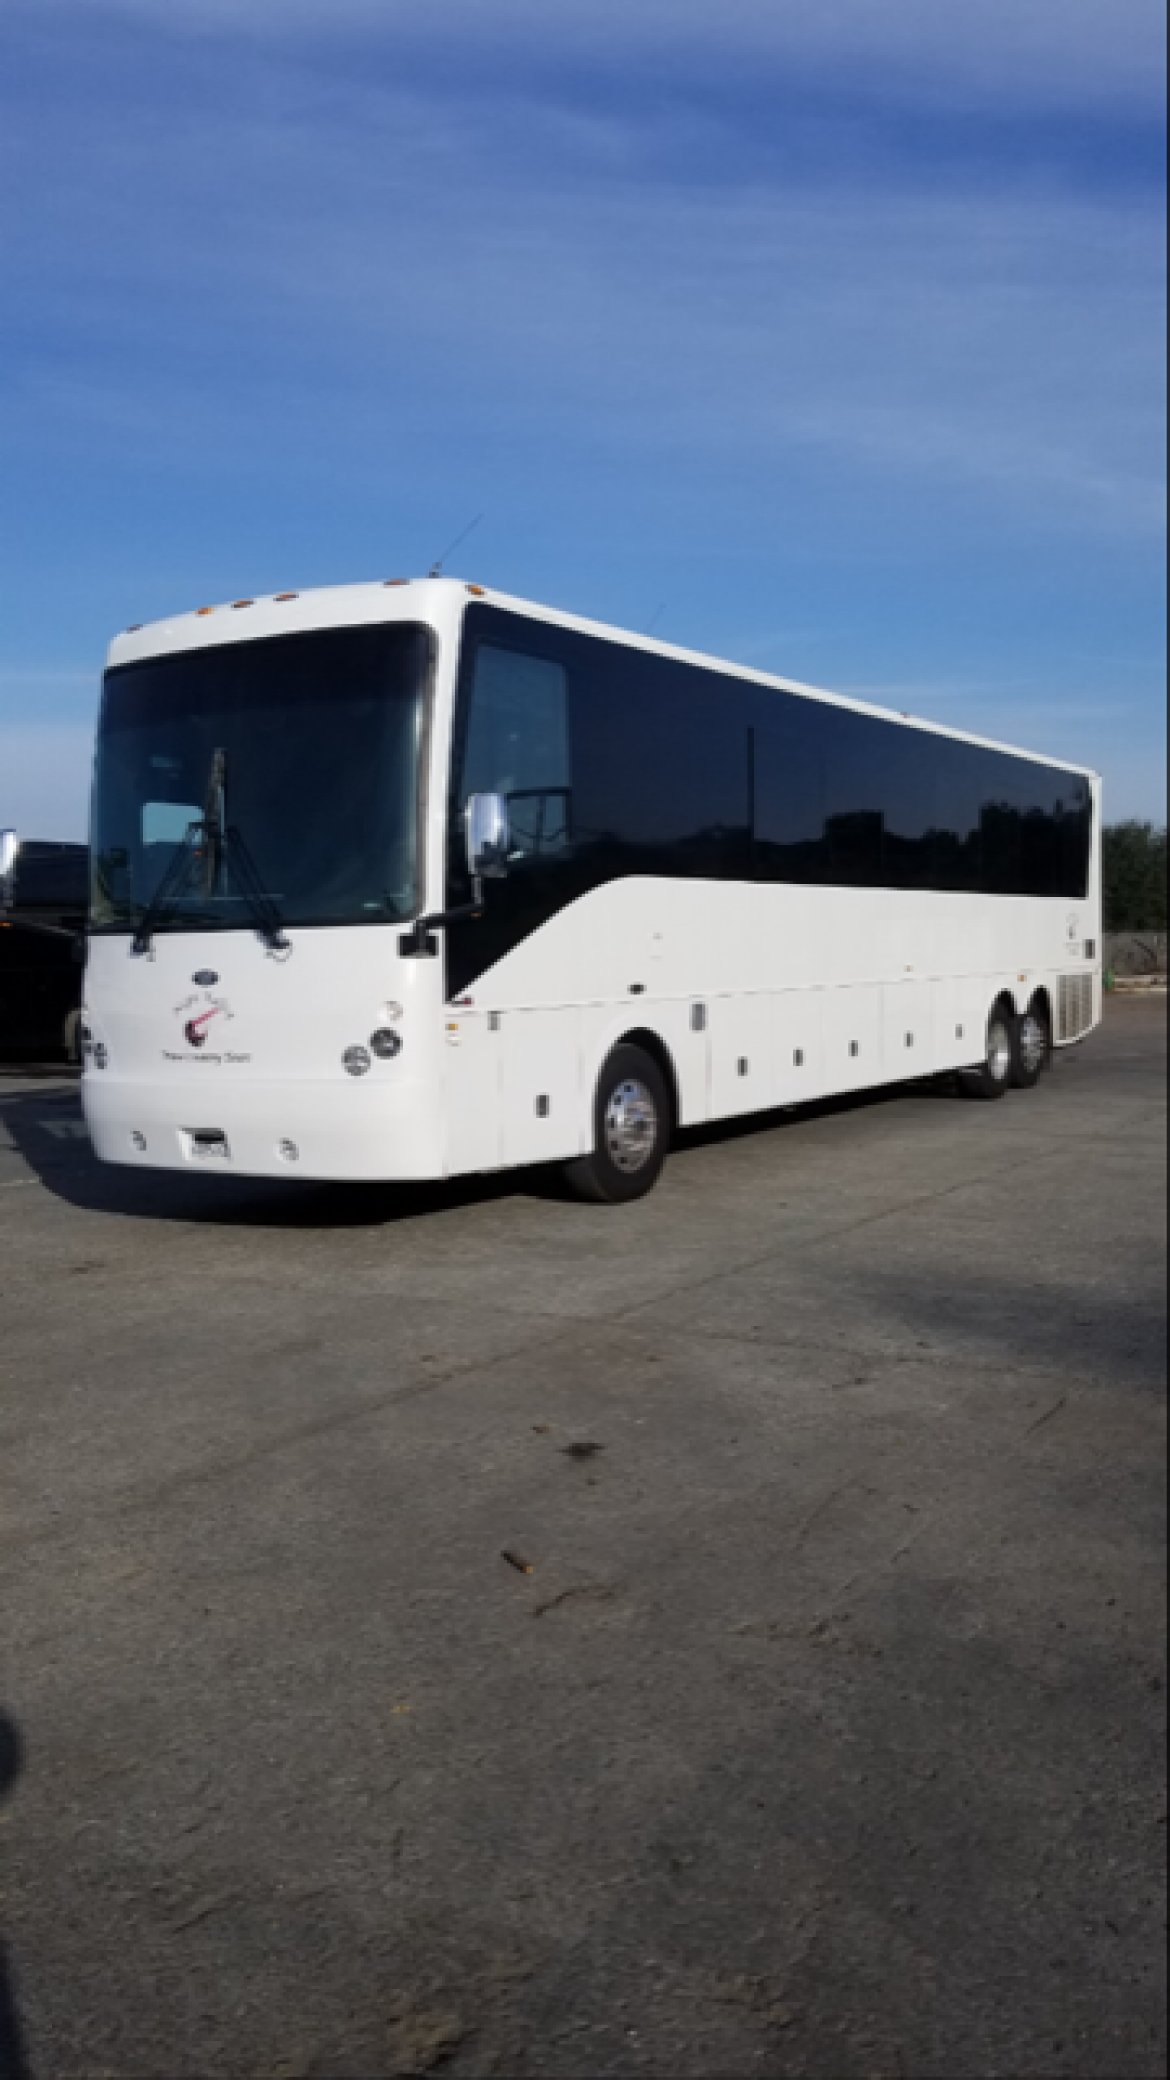 Limo Bus for sale: 2017 Freightliner CT COACH 45&#039; 45&quot; by CT COACHWORKS